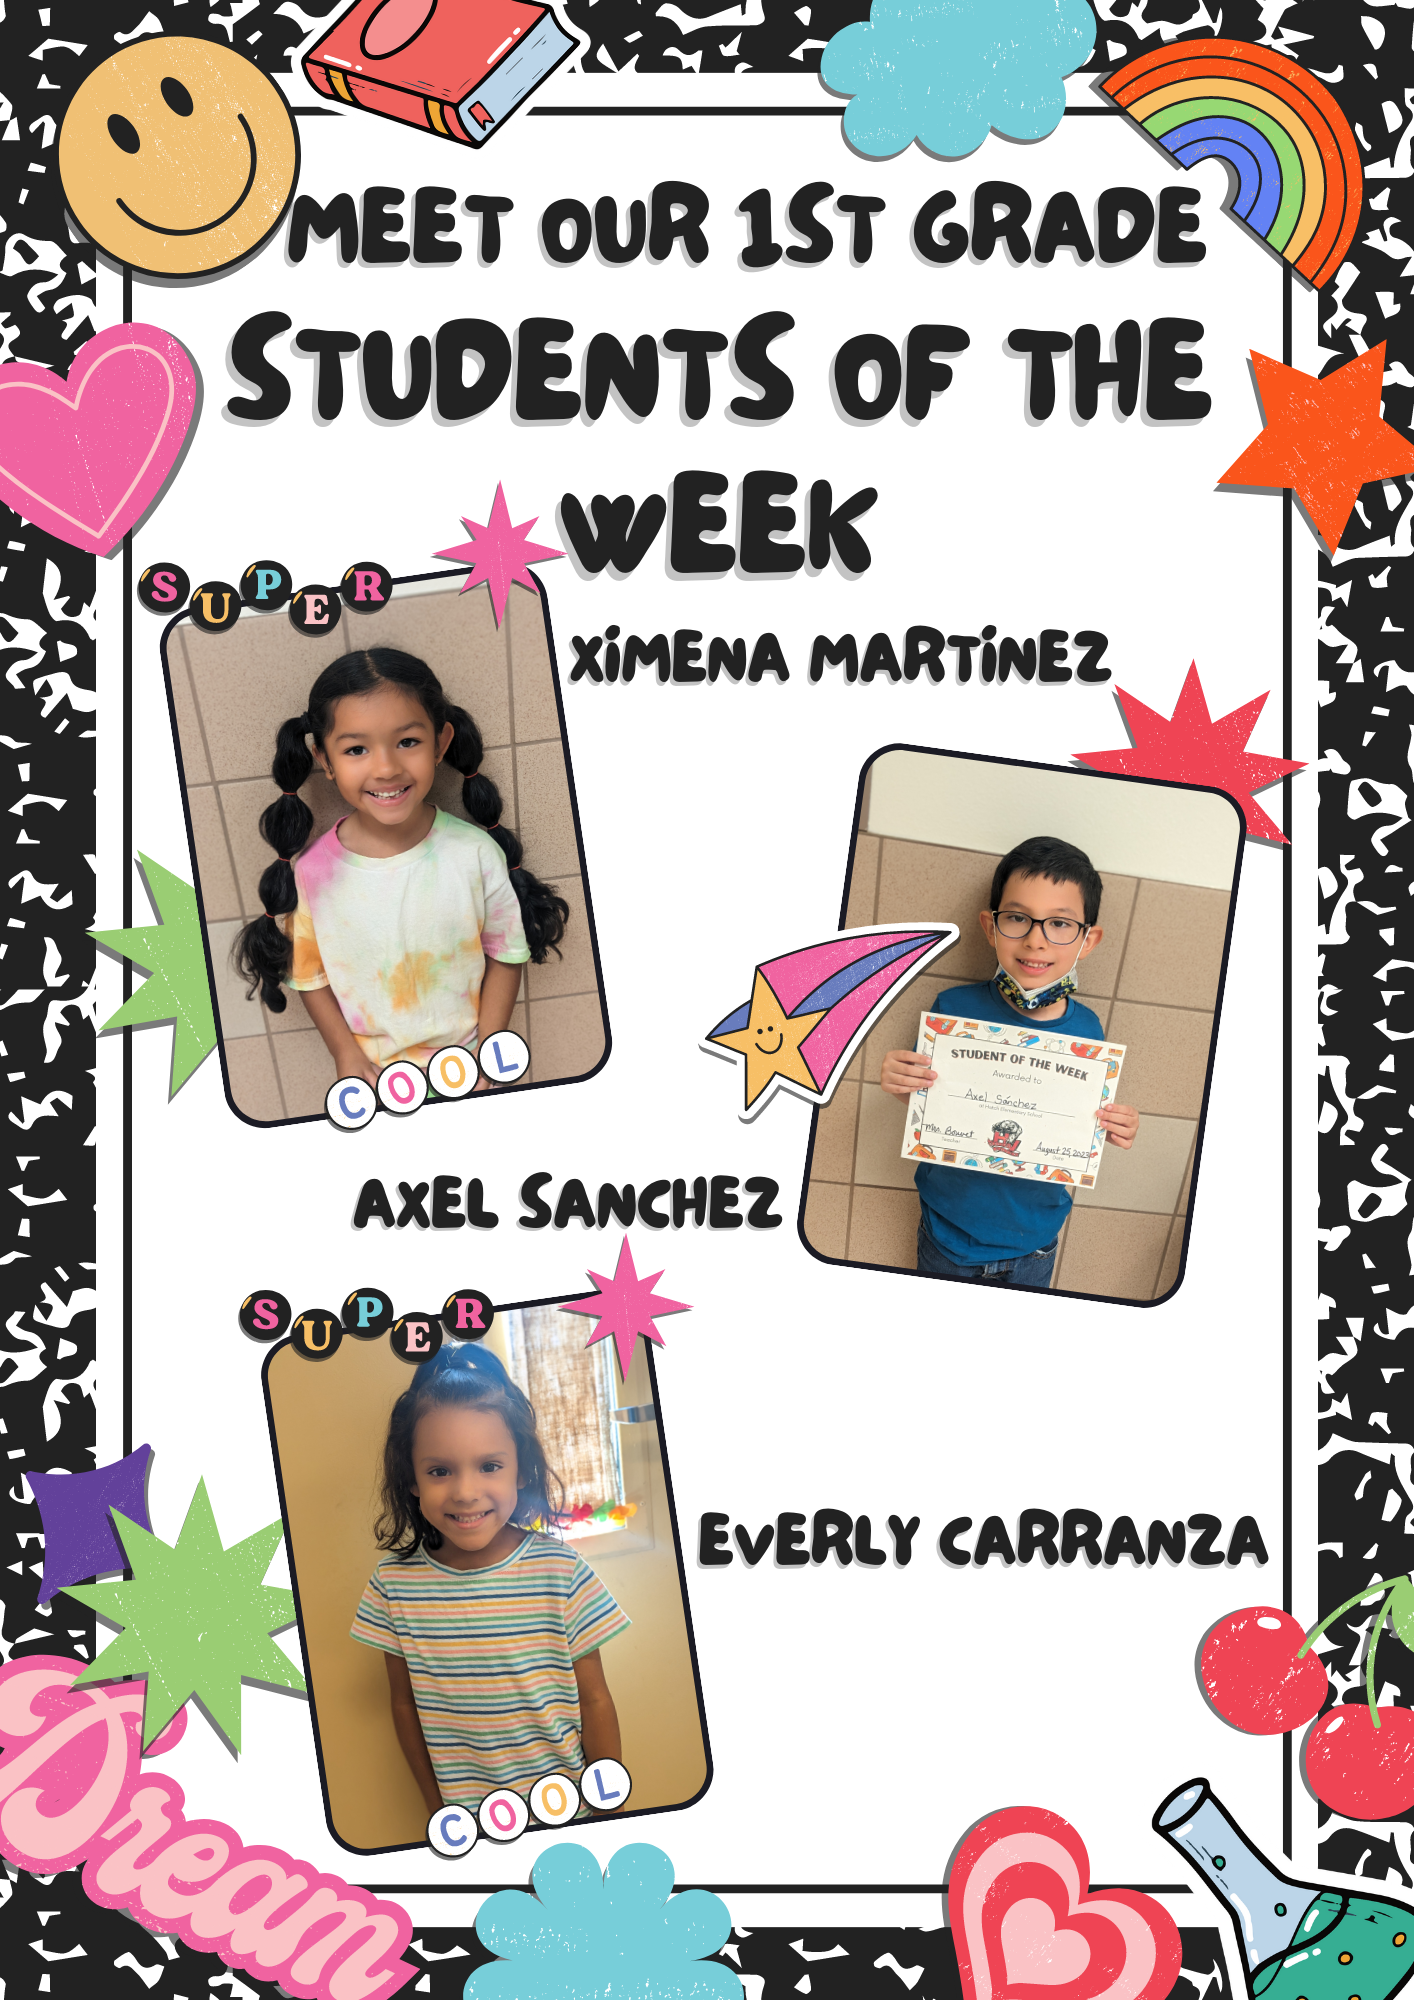 1st Grade Students of the Week